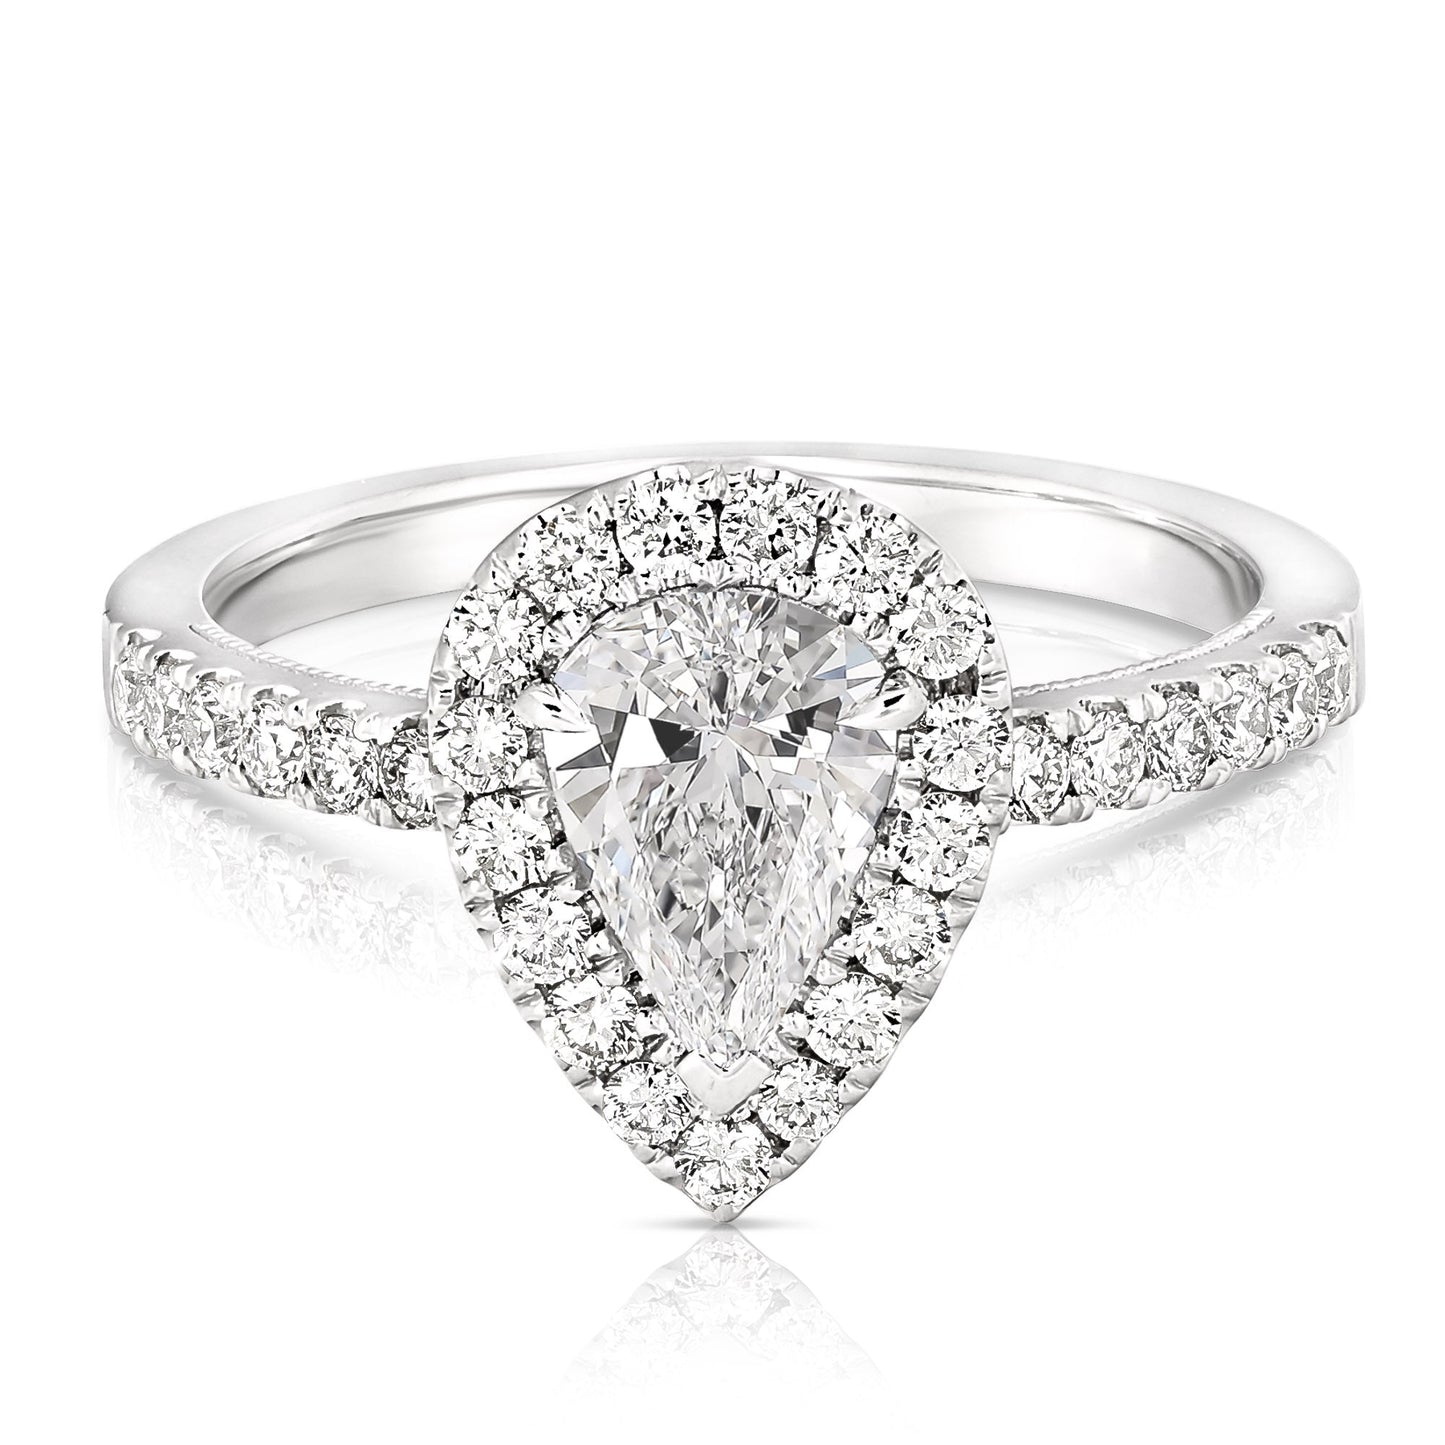 1 1/4 Ct Total Weight Pear Shape Diamond Engagement Ring